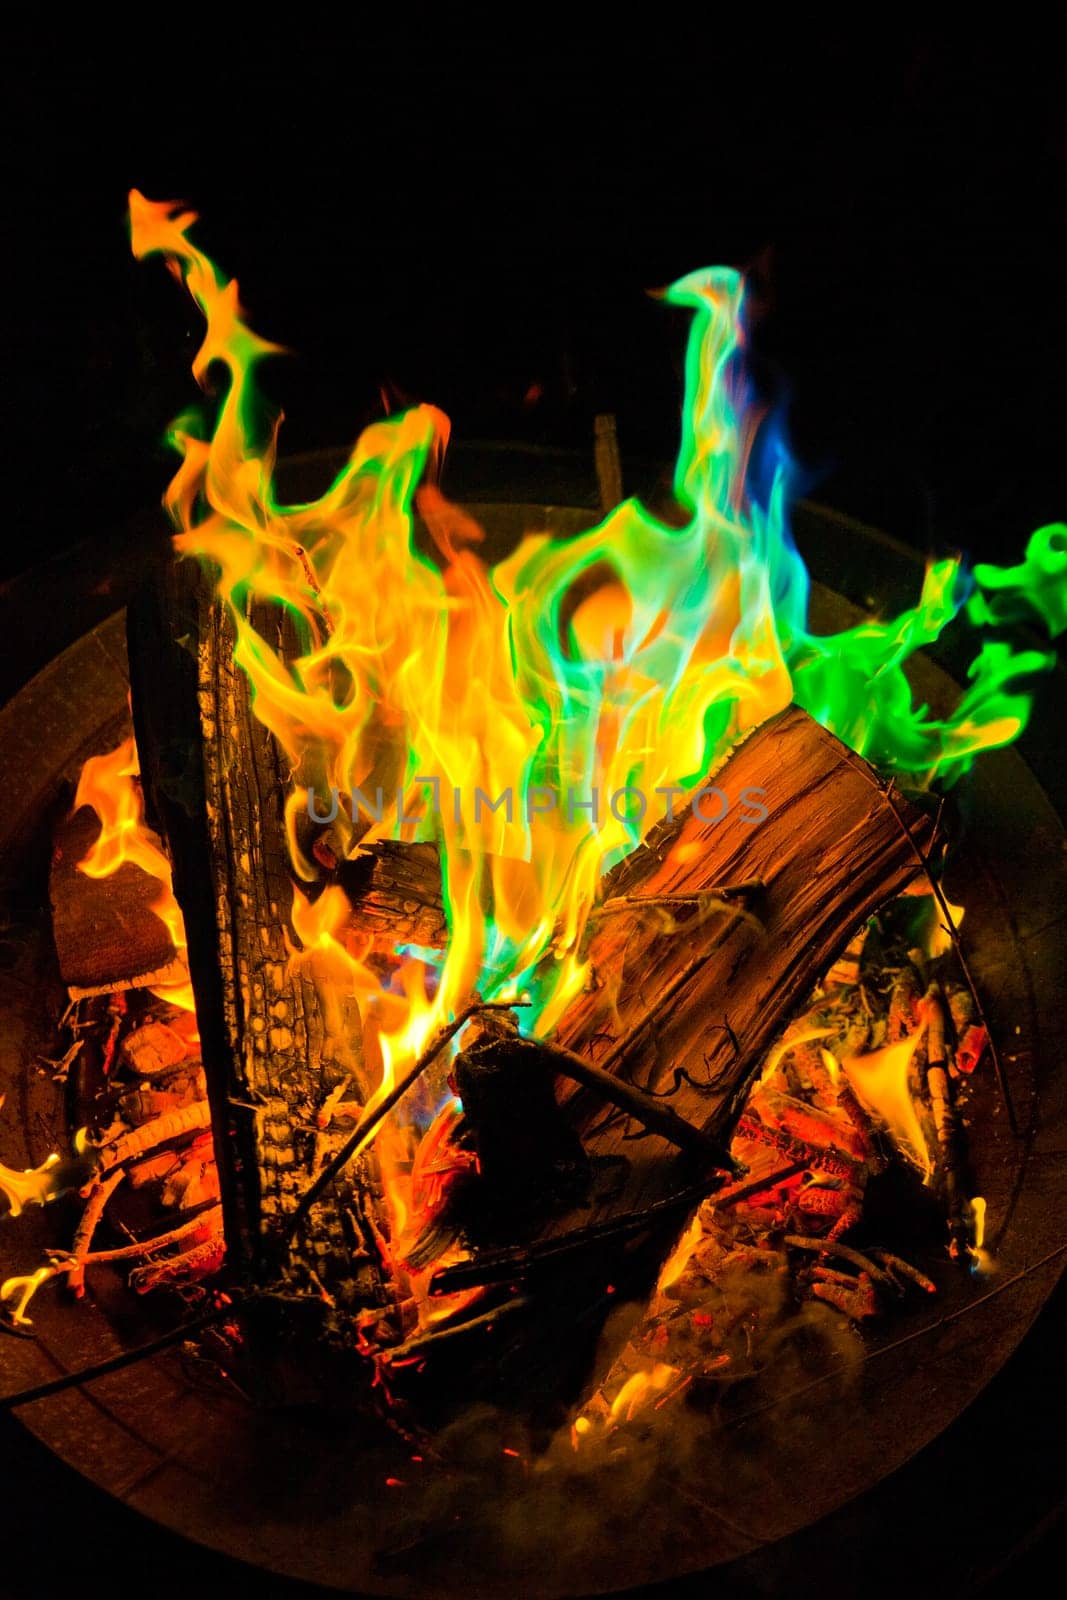 Experience the mesmerizing allure of a vibrant, multi-hued fire in this captivating stock photo. Set within a metal fire pit, the flames dance with green, blue, and traditional orange-yellow tones, creating a mystical and enchanting display.